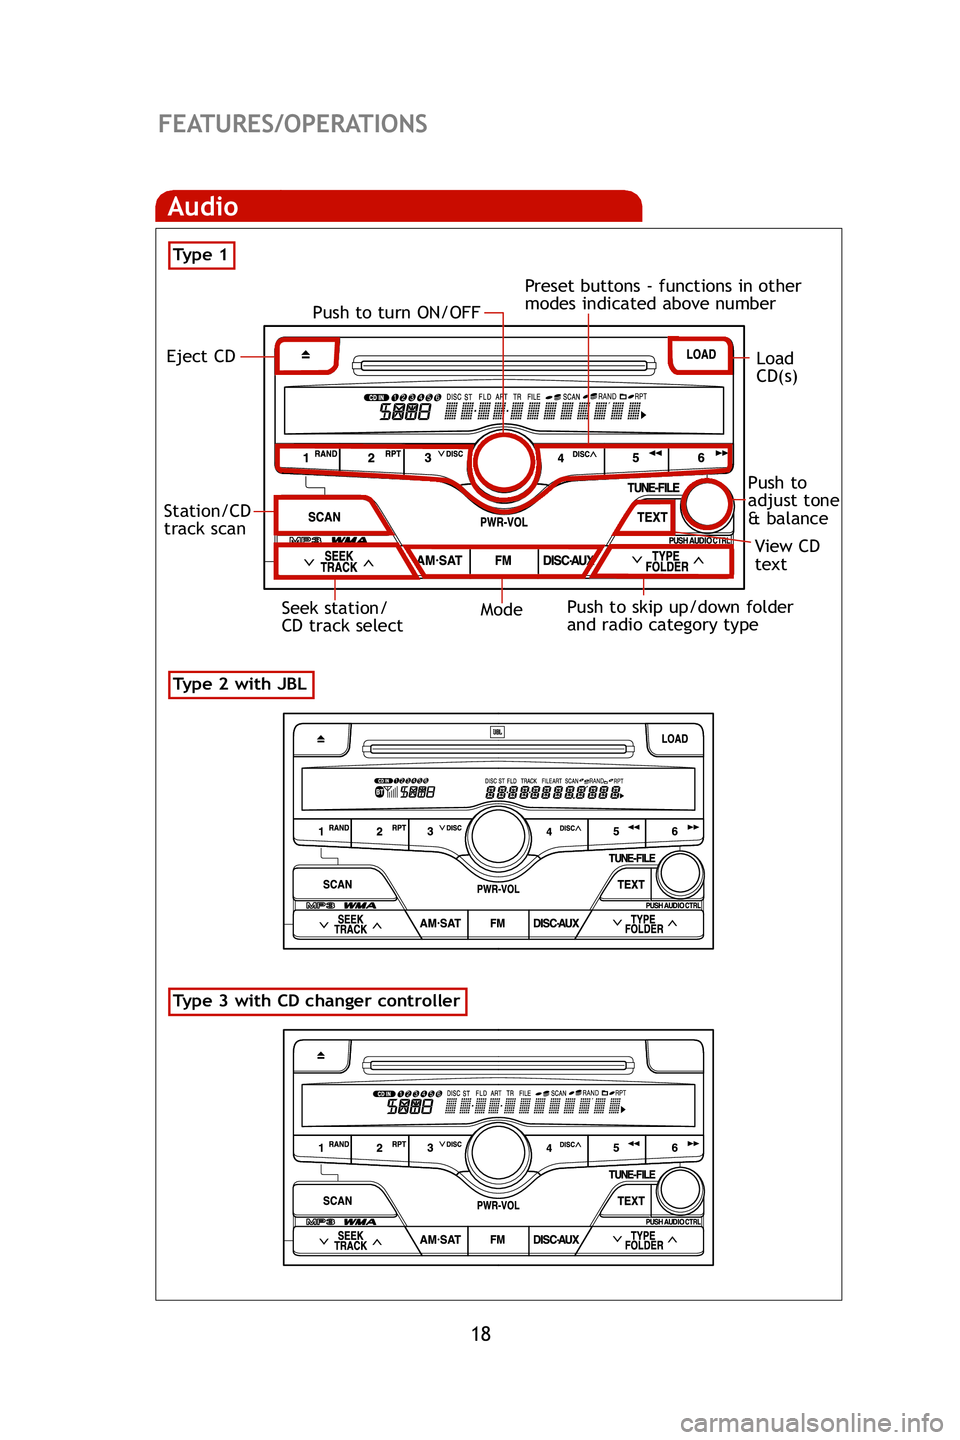 TOYOTA VENZA 2009  Owners Manual (in English) 18
FEATURES/OPERATIONS
Audio
Type 2 with JBL
Type 3 with CD changer controller
Audio
Ty p e  1  
Eject CDPush to turn ON/OFF
View CD
text
Seek station/
CD track select
Station/CD
track scan
ModePreset